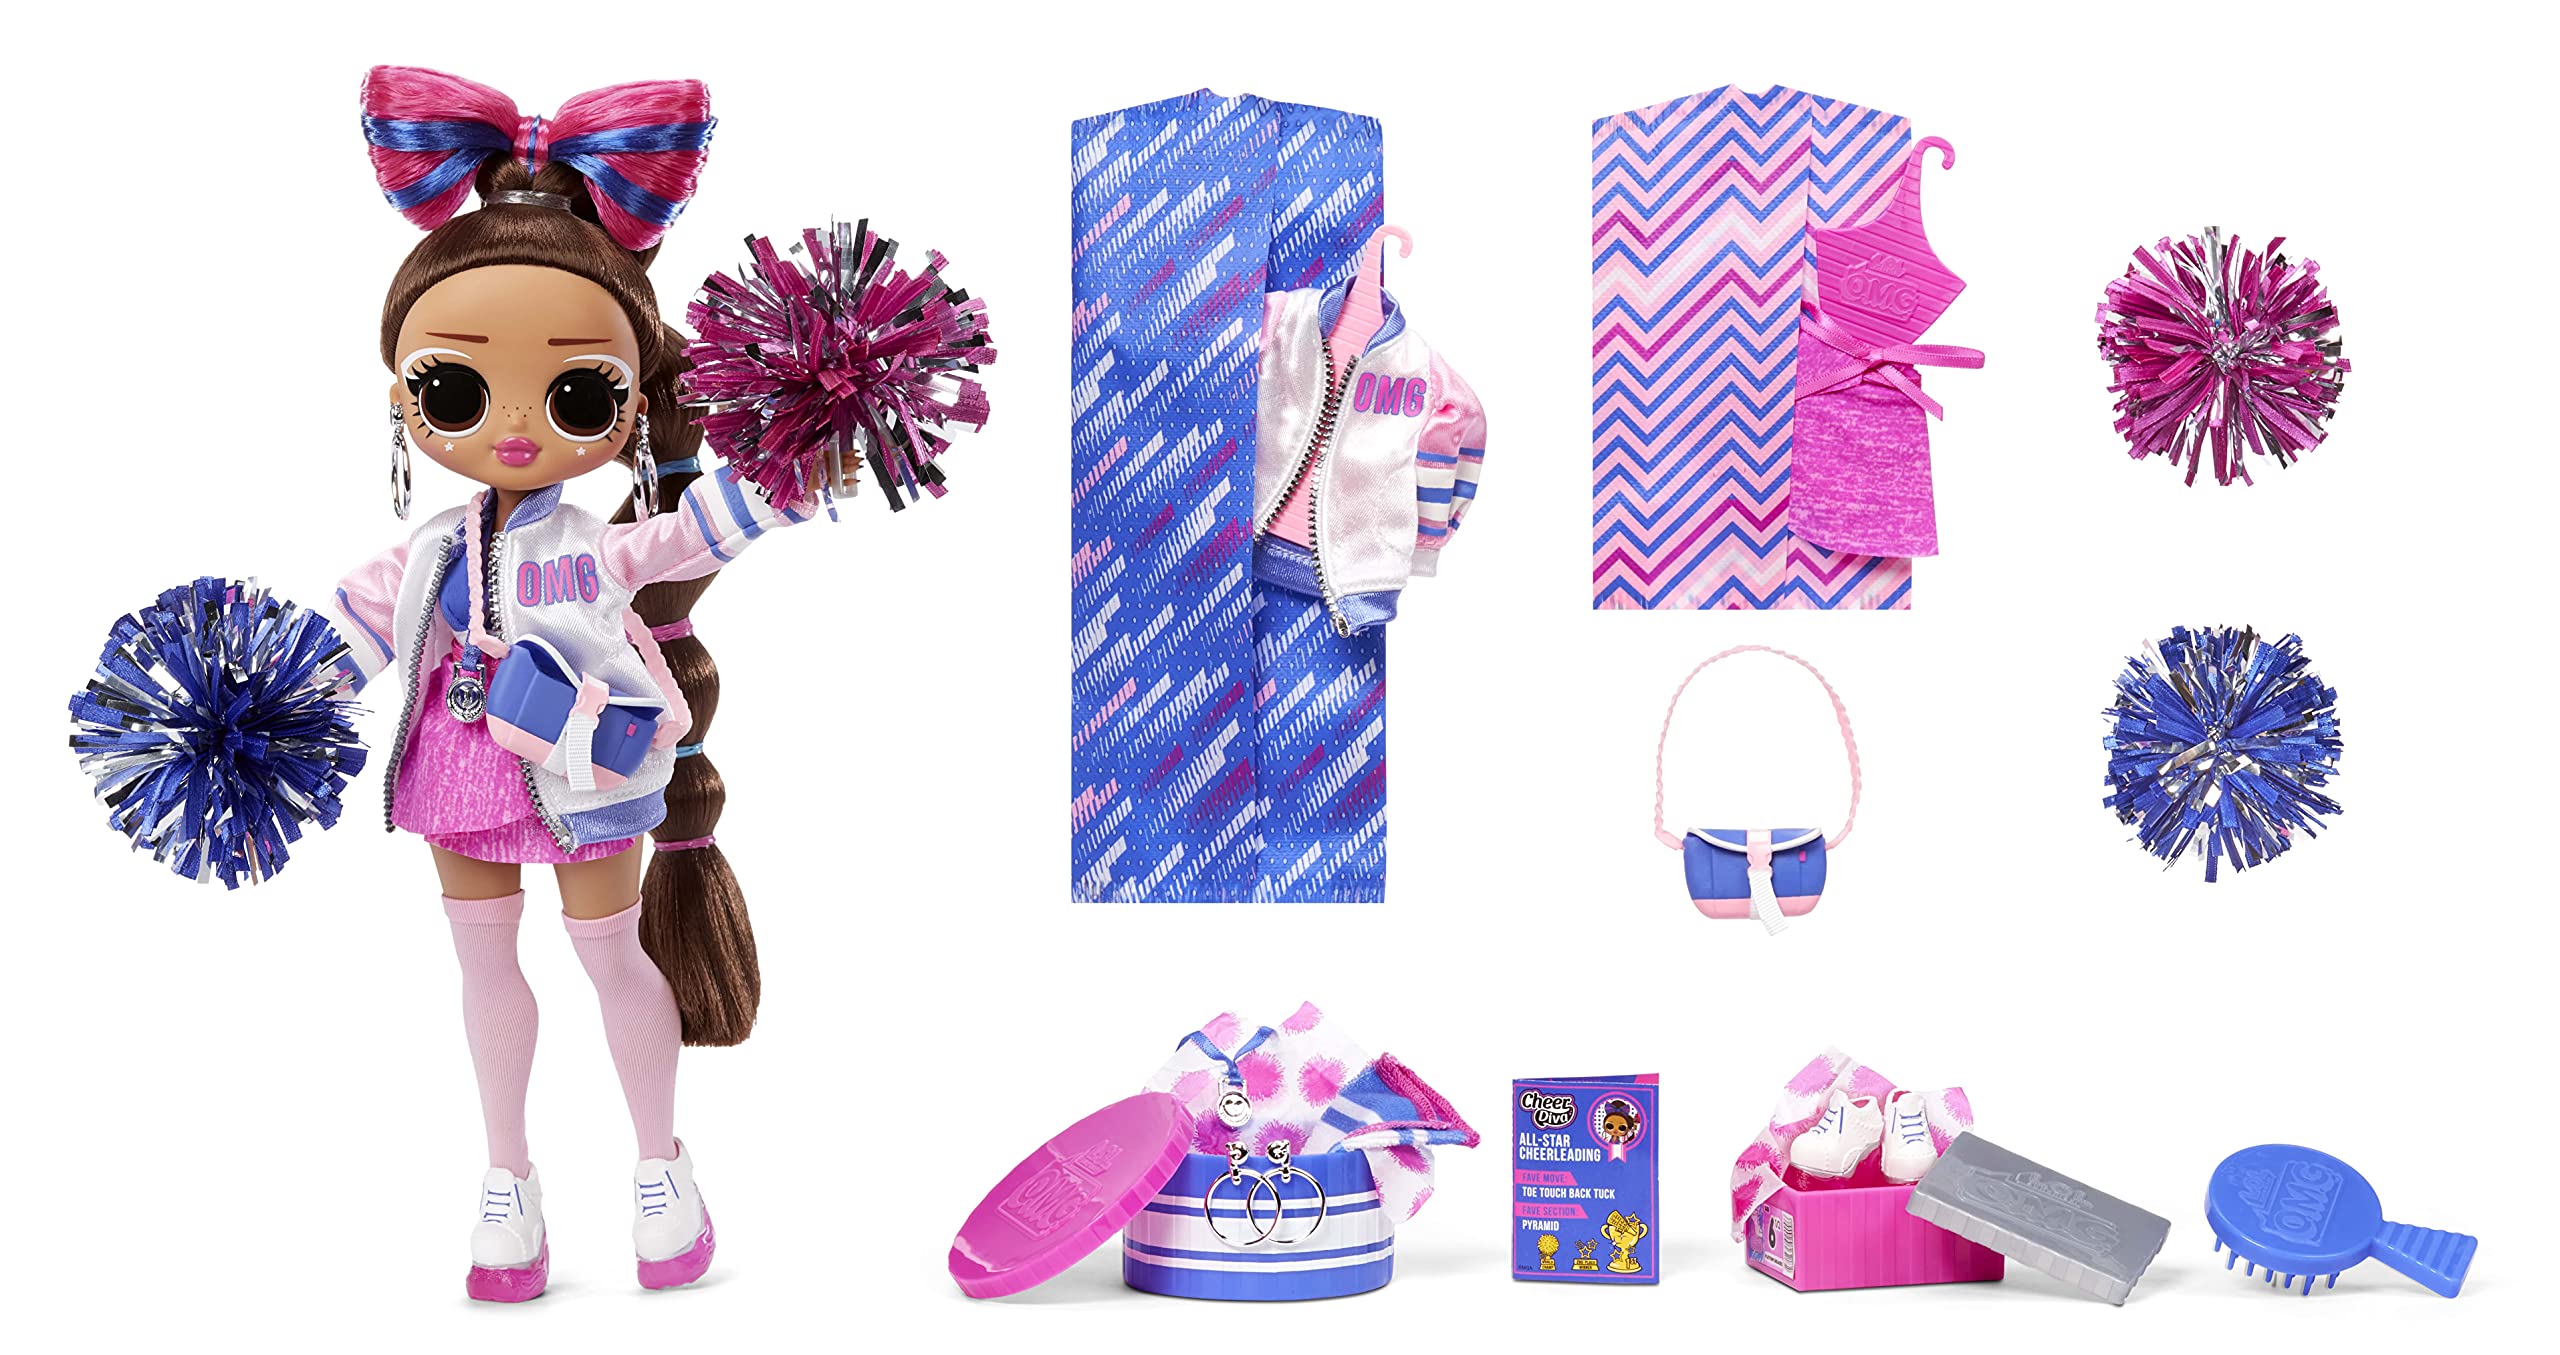 LOL Surprise OMG Sports Cheer Diva Competitive Cheerleading Fashion Doll with 20 Surprises Including Sparkly Accessories & Reusable Playset, Posable - Gift for Kids, Toys for Girls Boys Ages 4 5 6 7+